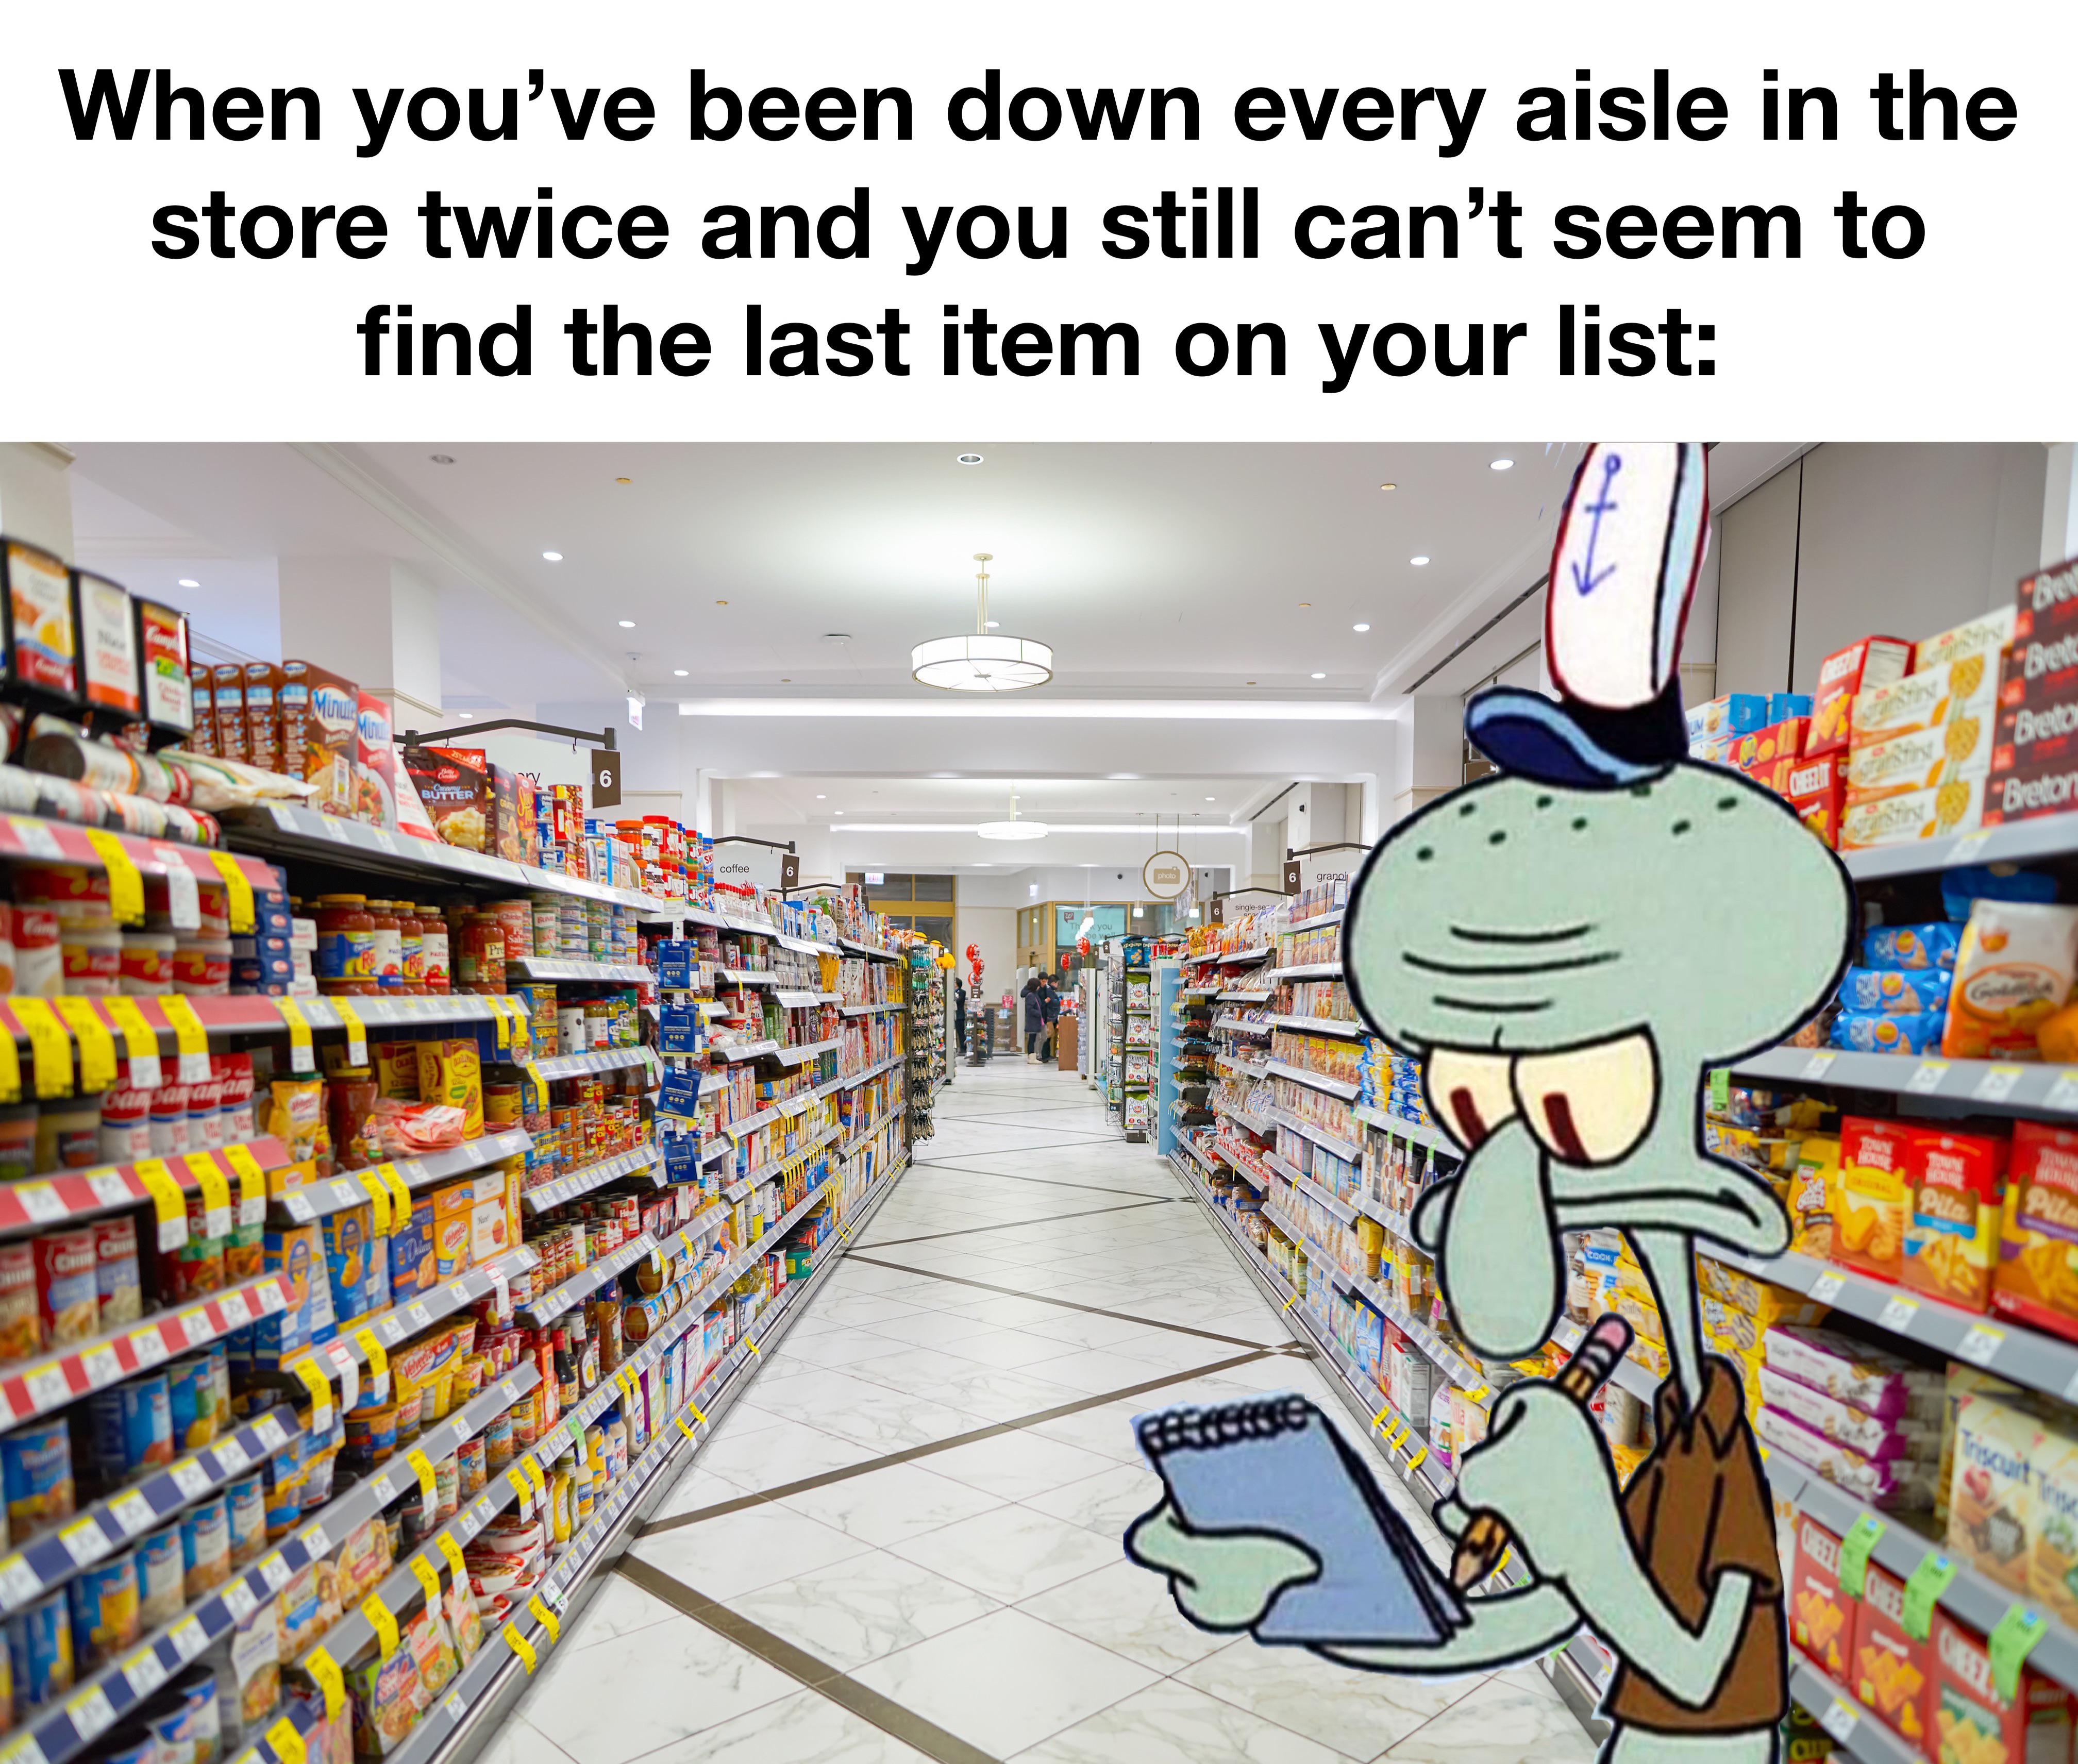 funny memes - Internet meme - When you've been down every aisle in the store twice and you still can't seem to find the last item on your list Bet Beta Betr